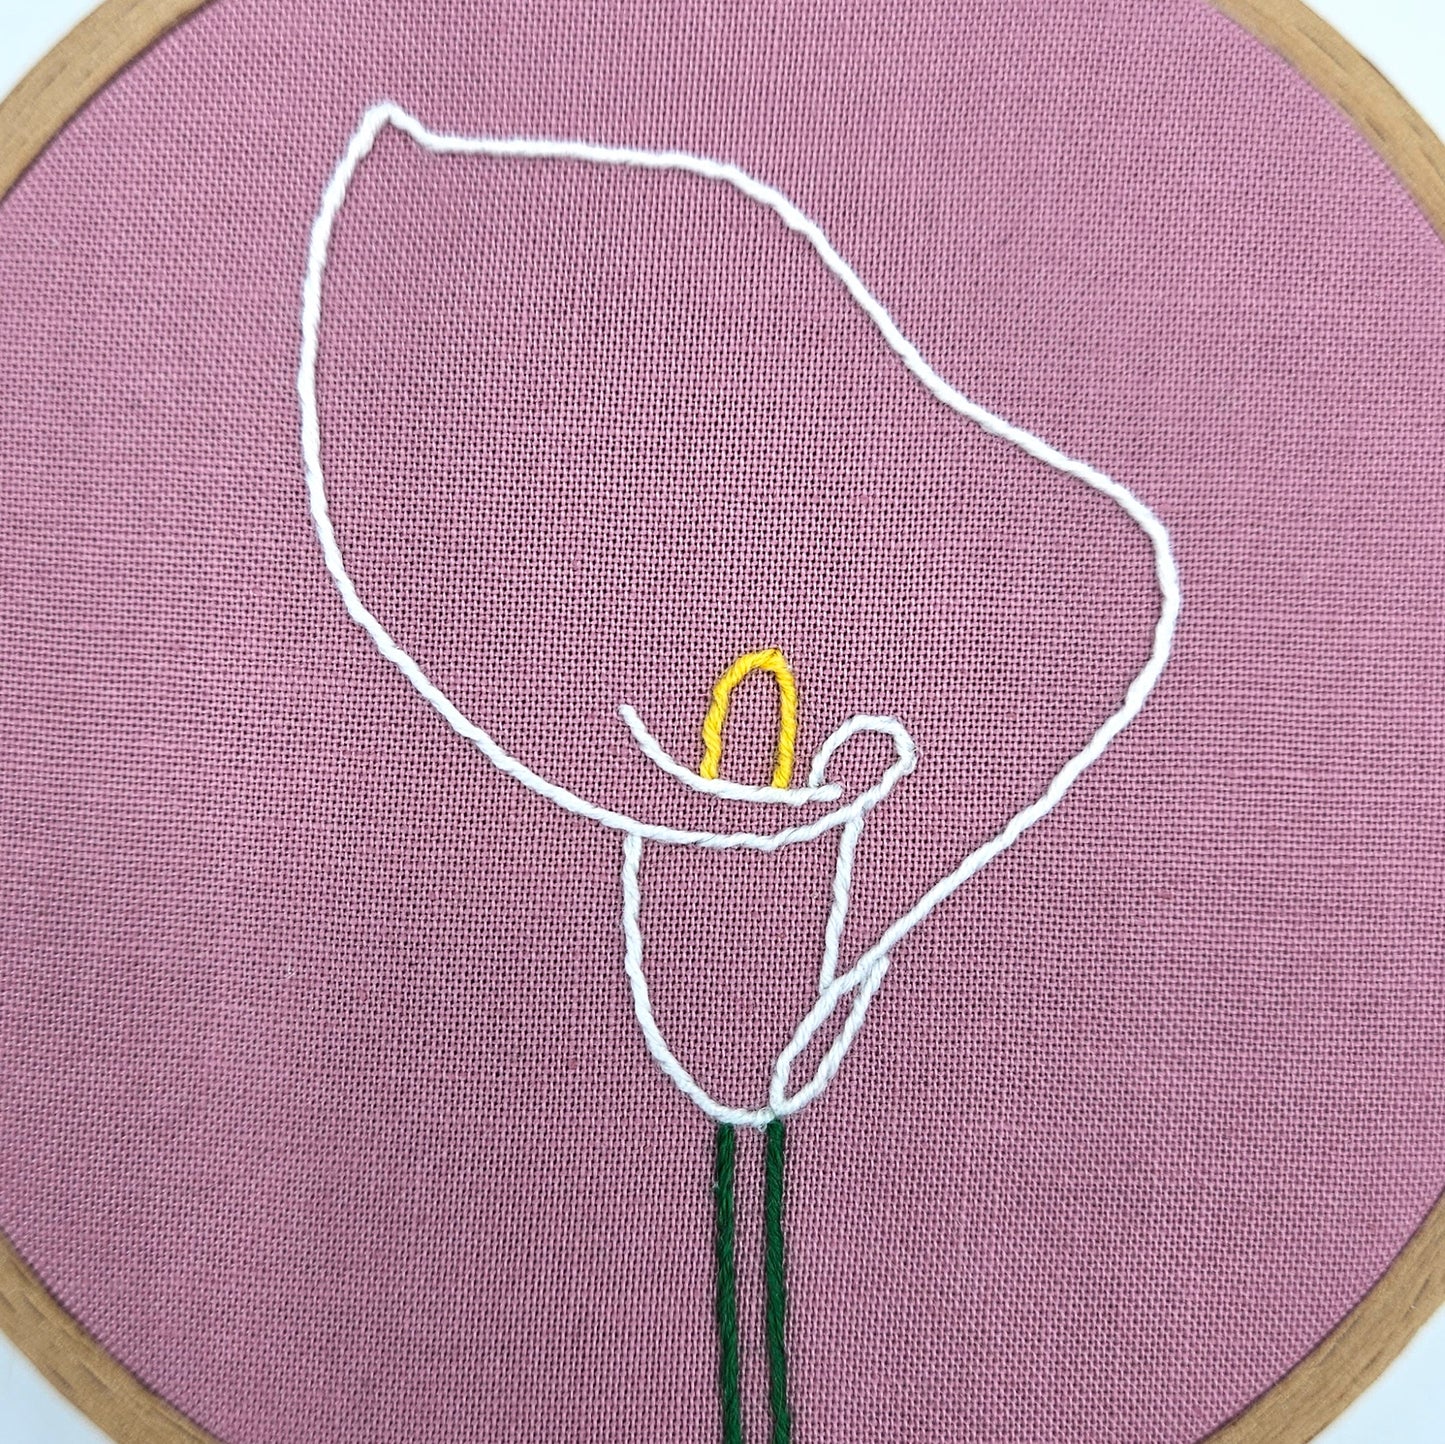 Calla Lily Flower Embroidery Hoop Art